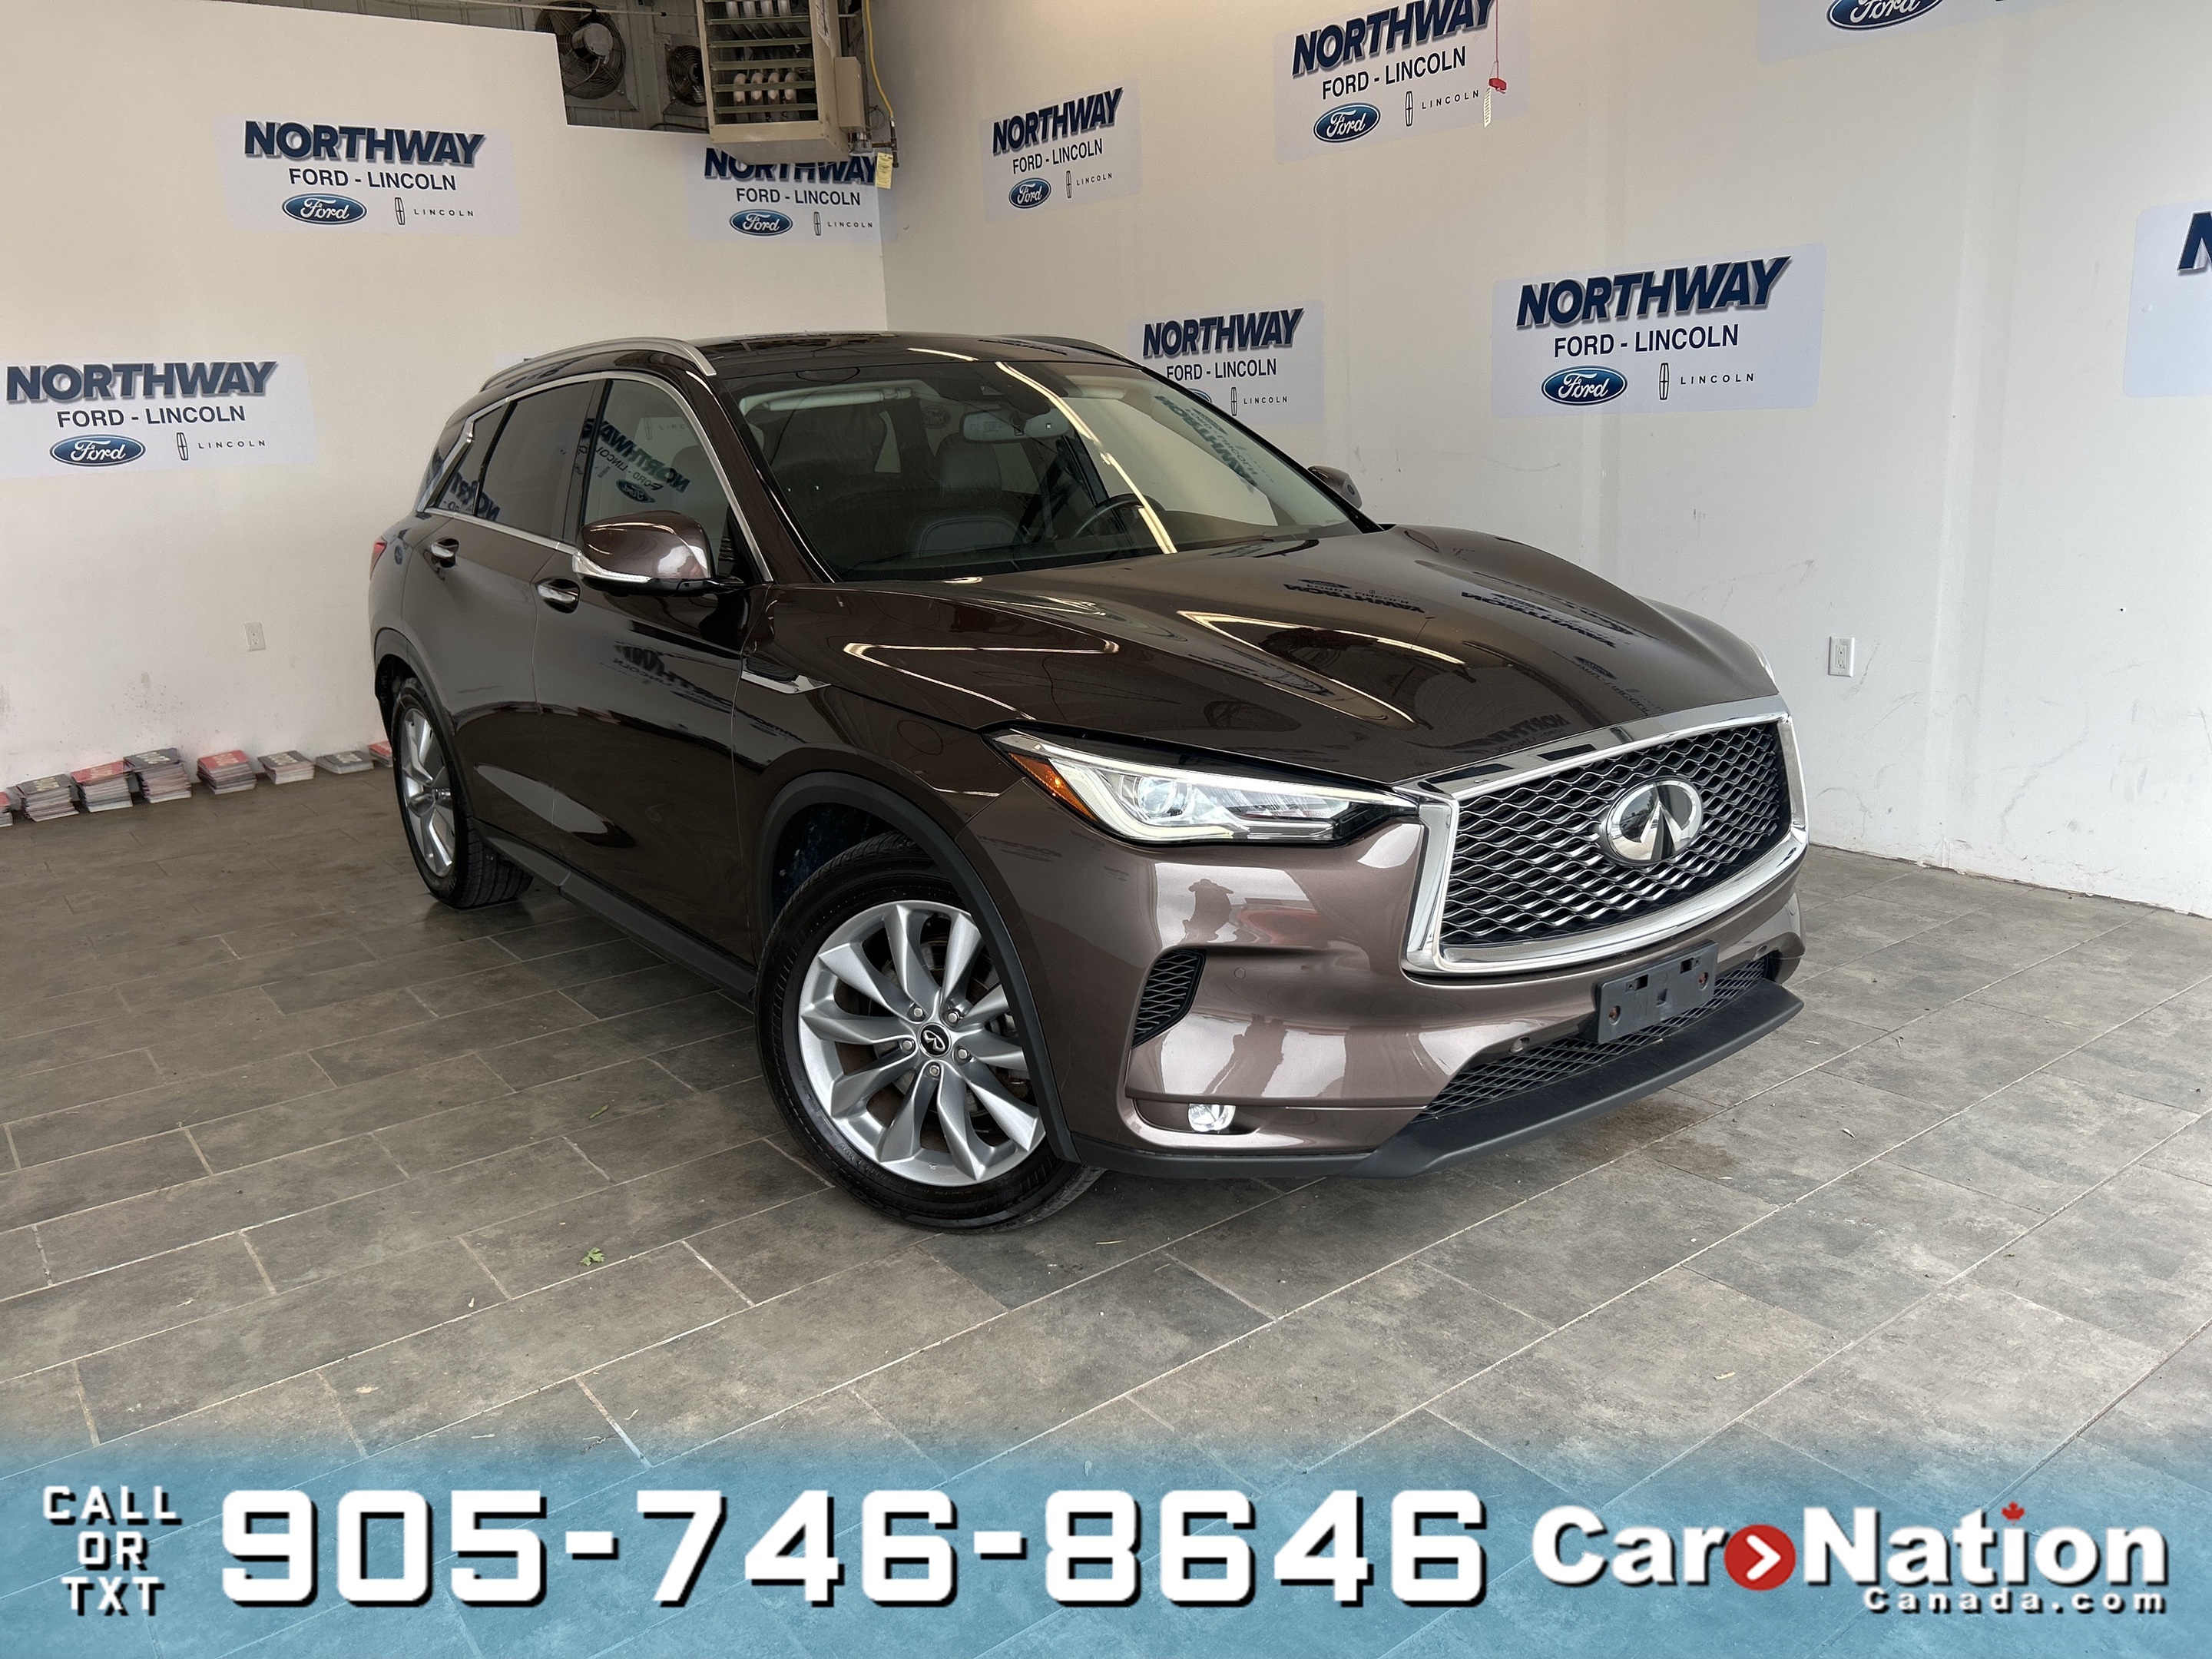 2019 Infiniti QX50 ESSENTIAL |AWD | LEATHER | PANO ROOF | NAV|1 OWNER